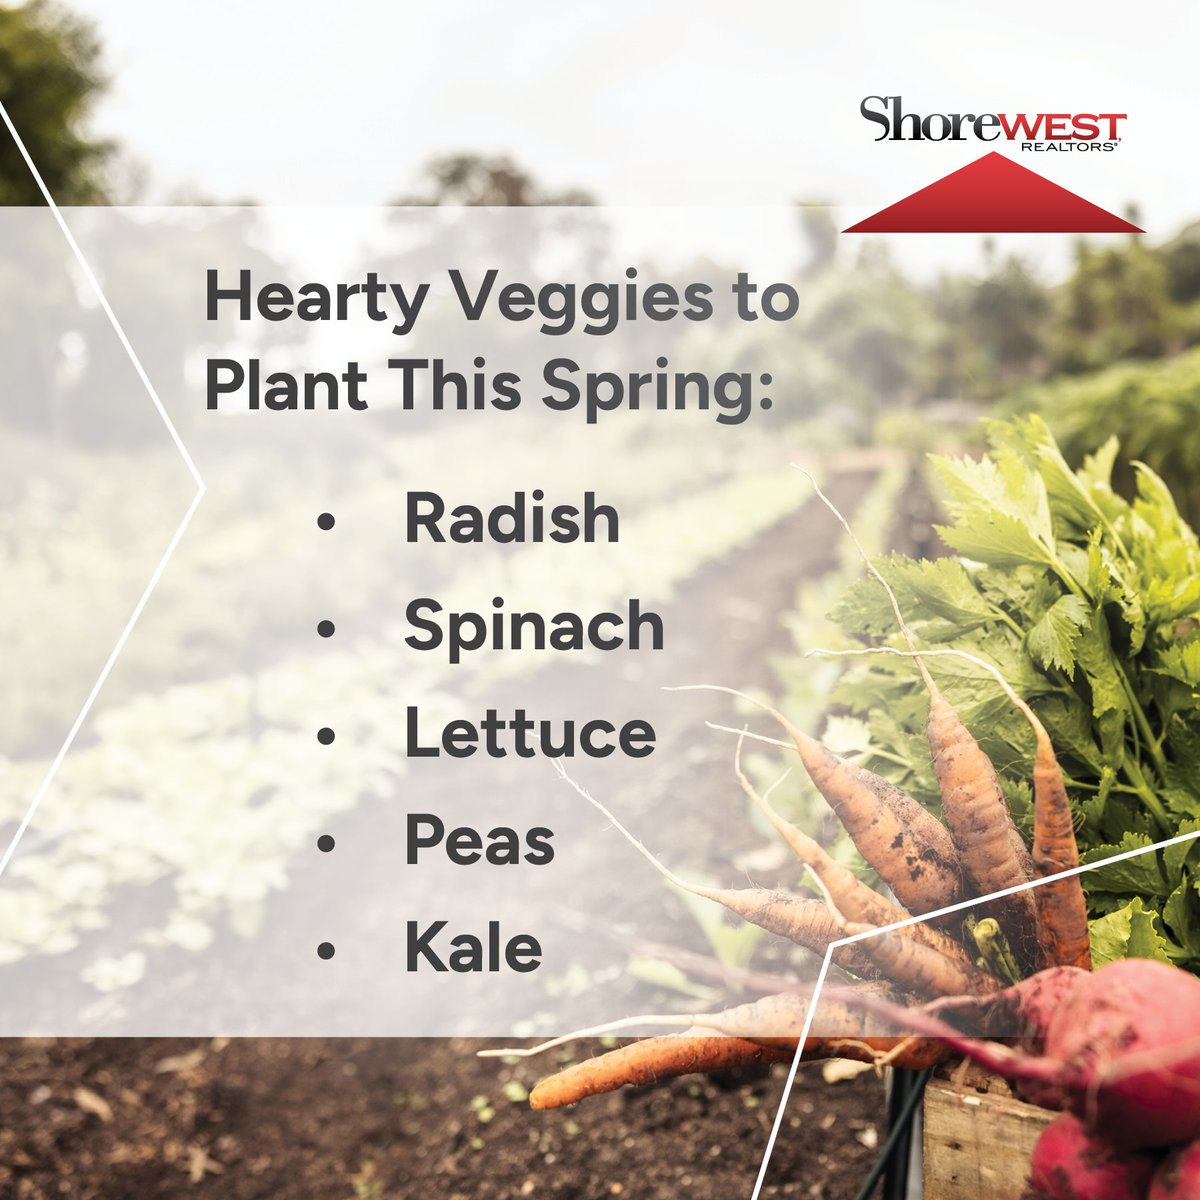 Get your garden started early this year with some fast-growing, hearty veggies! These plants can handle any weather that’s thrown at them and are the perfect way to get your garden kick-started. 

#HelloHomeowner
#Spring2024
#ShorewestRealtors 
#Gardening